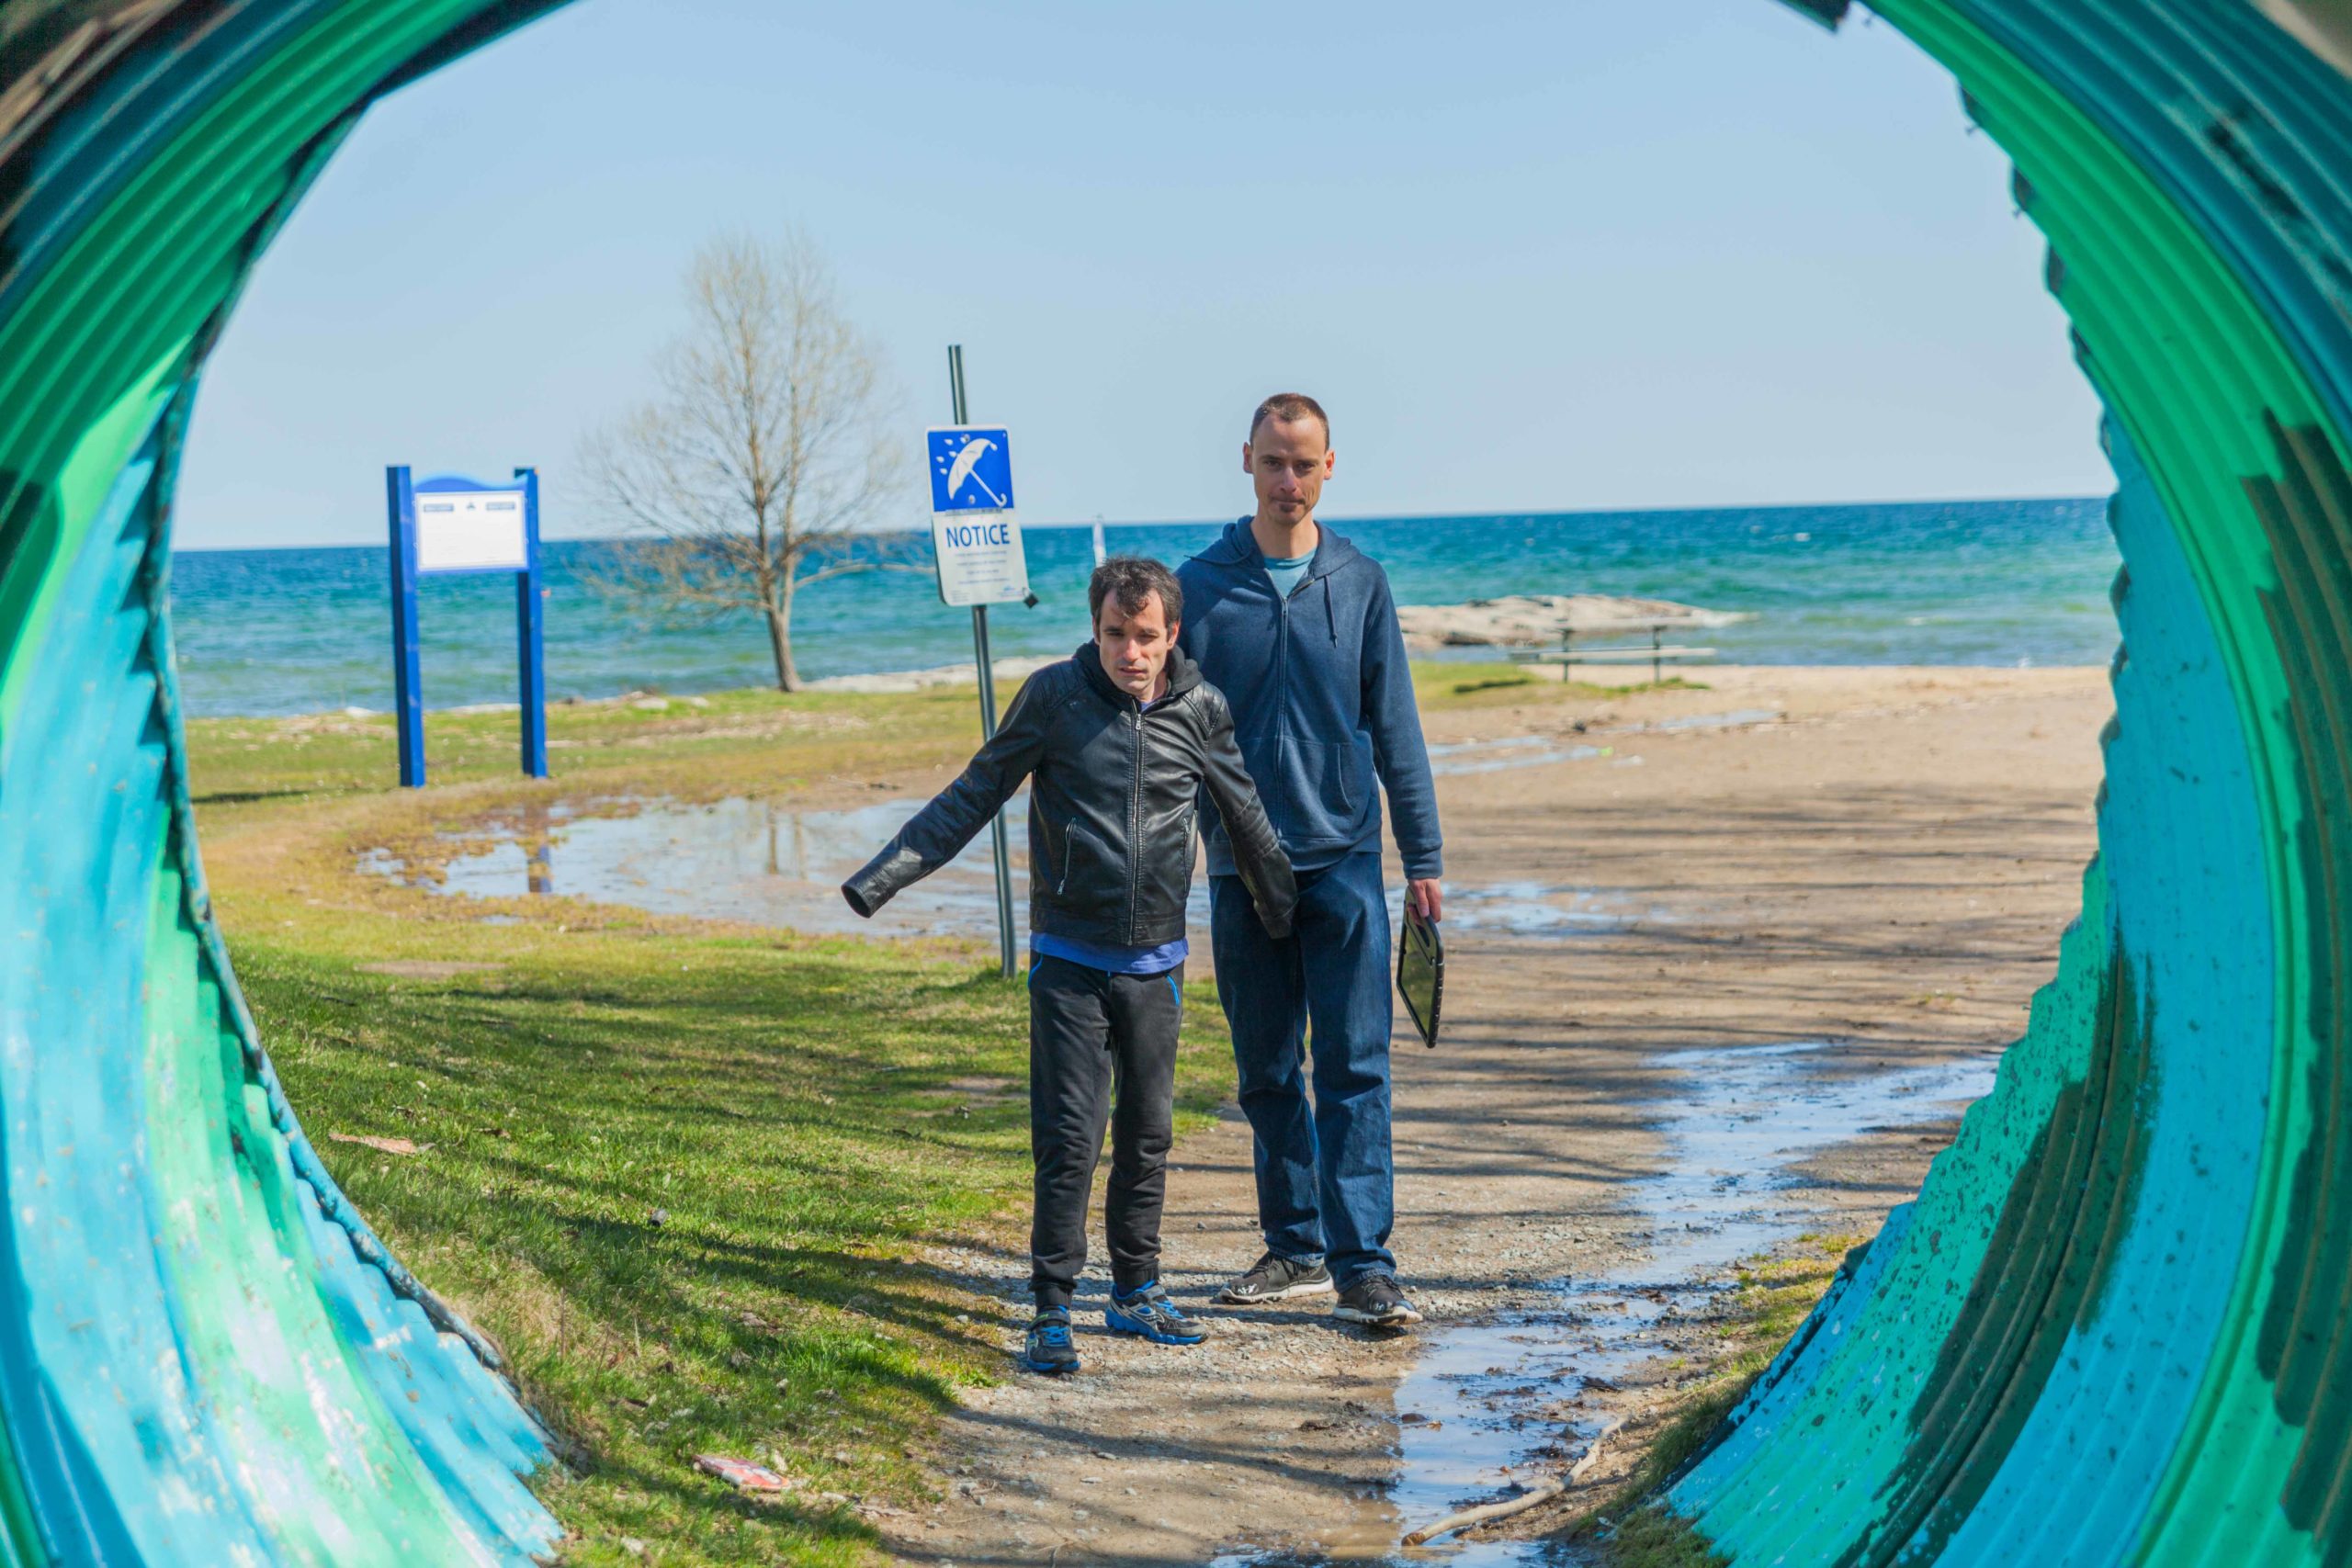 This image is captured through the perspective of a turquoise tunnel. An intervenor guides a man with deafblindness as they walk on a sandy beach.